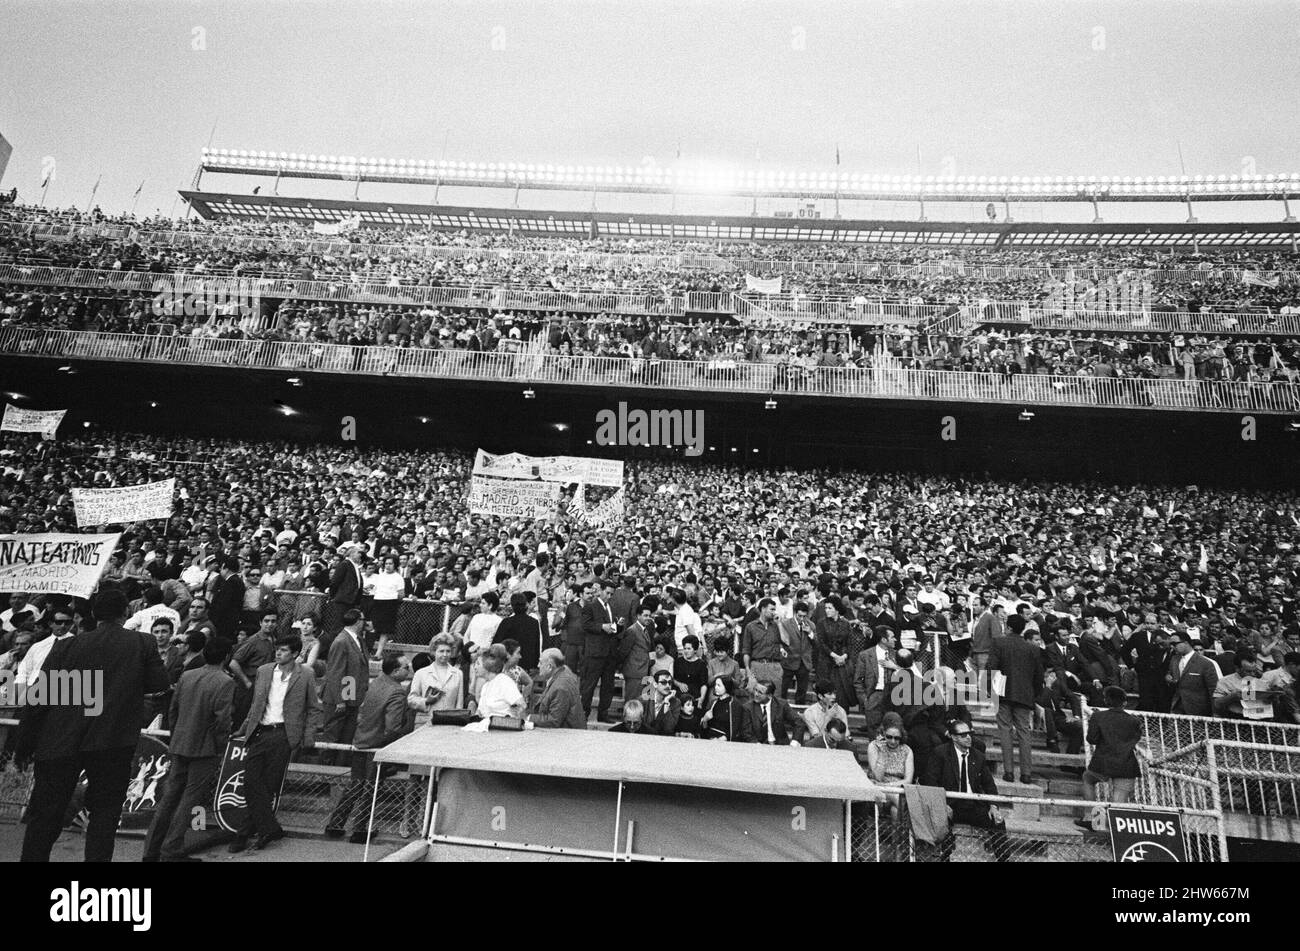 European Cup Semi Final Second Leg match at the Santiago Bernabeu Stadium in Madrid. Real Madrid and Manchester United drew the match 3-3 but United advanced to their first ever European Cup Final thanks to the slender 1-0 victory in the first leg at Old Trafford.  Picture shows: The packed out stands of the Santiagio Bernabeu before kick off. 15th May 1968. Stock Photo